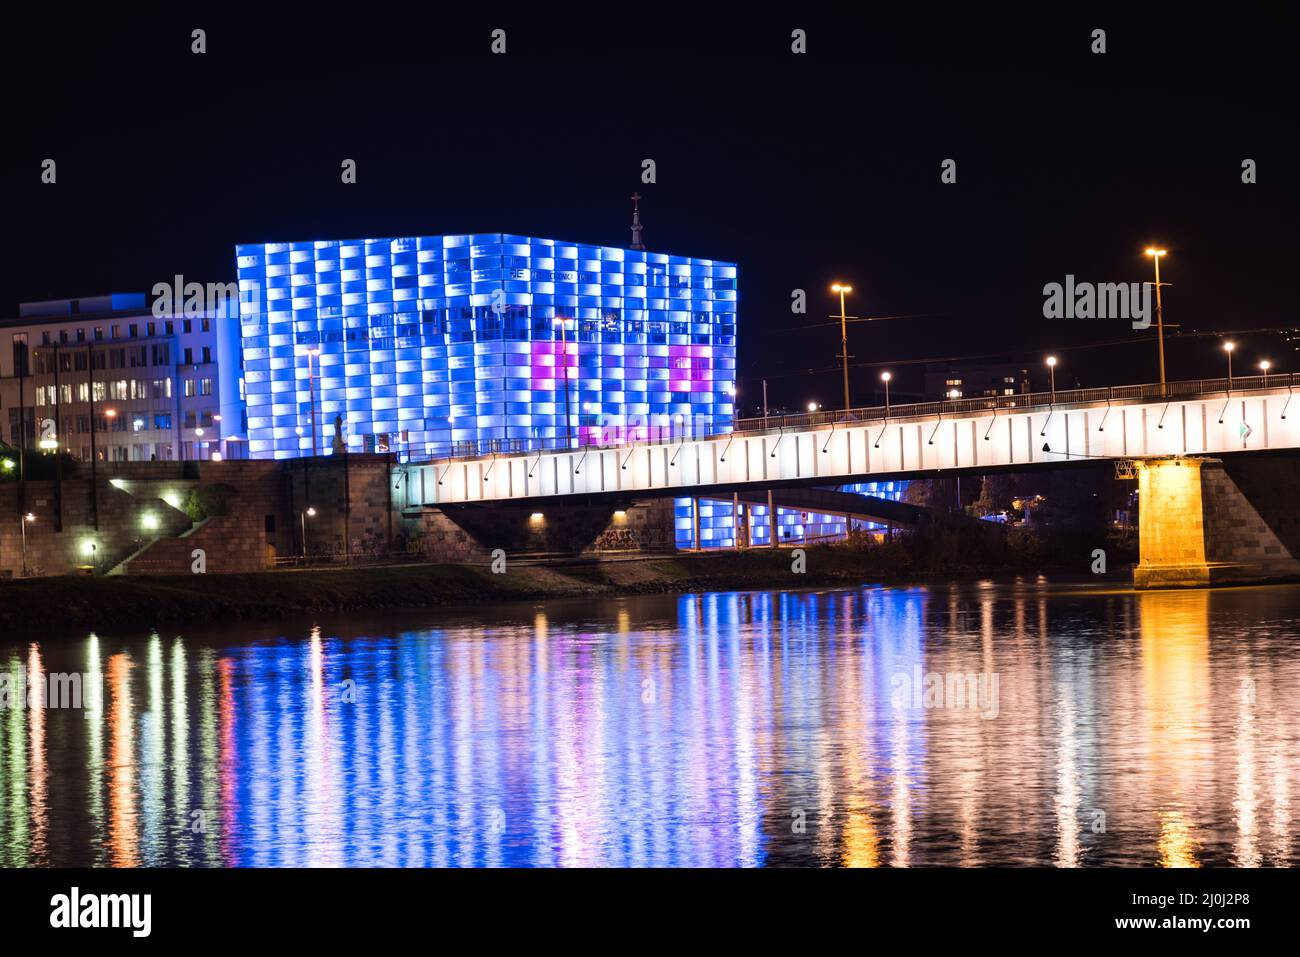 ARS Electronica Center illuminated at night by the Danube - Linz, Austria Stock Photo